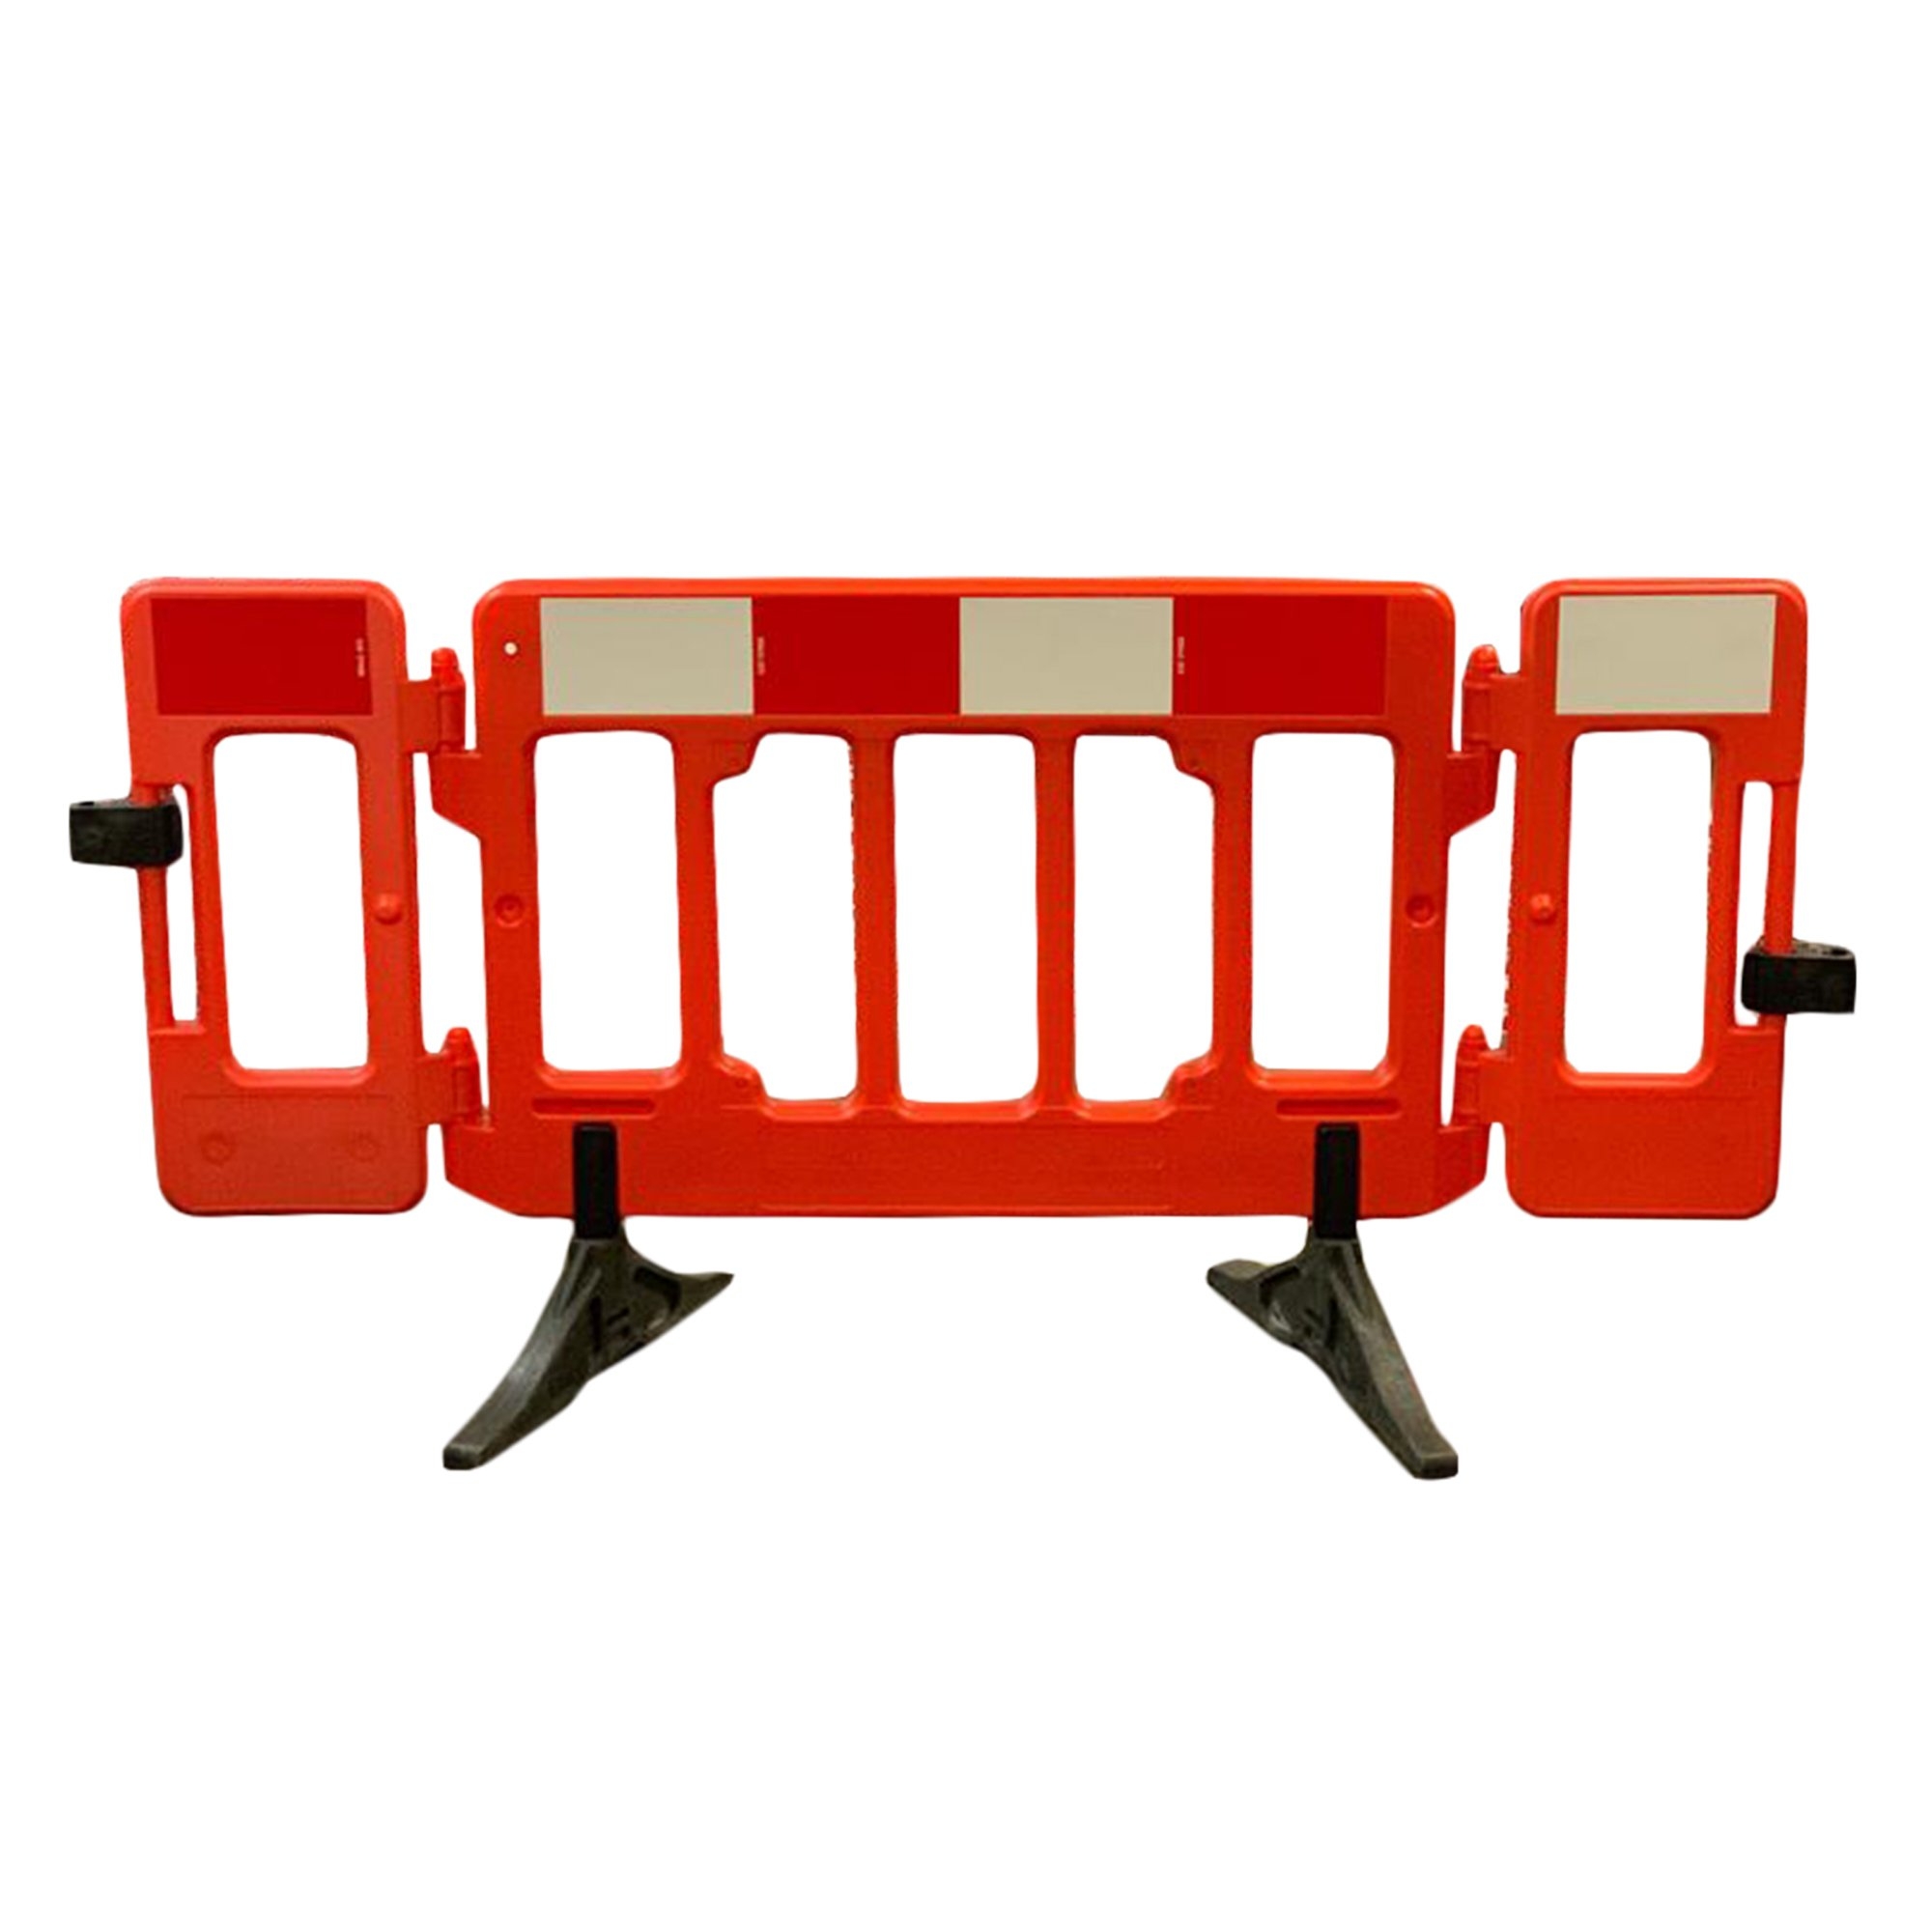 2M Olympic Barrier Standard Red / White Colour Street Solutions UK